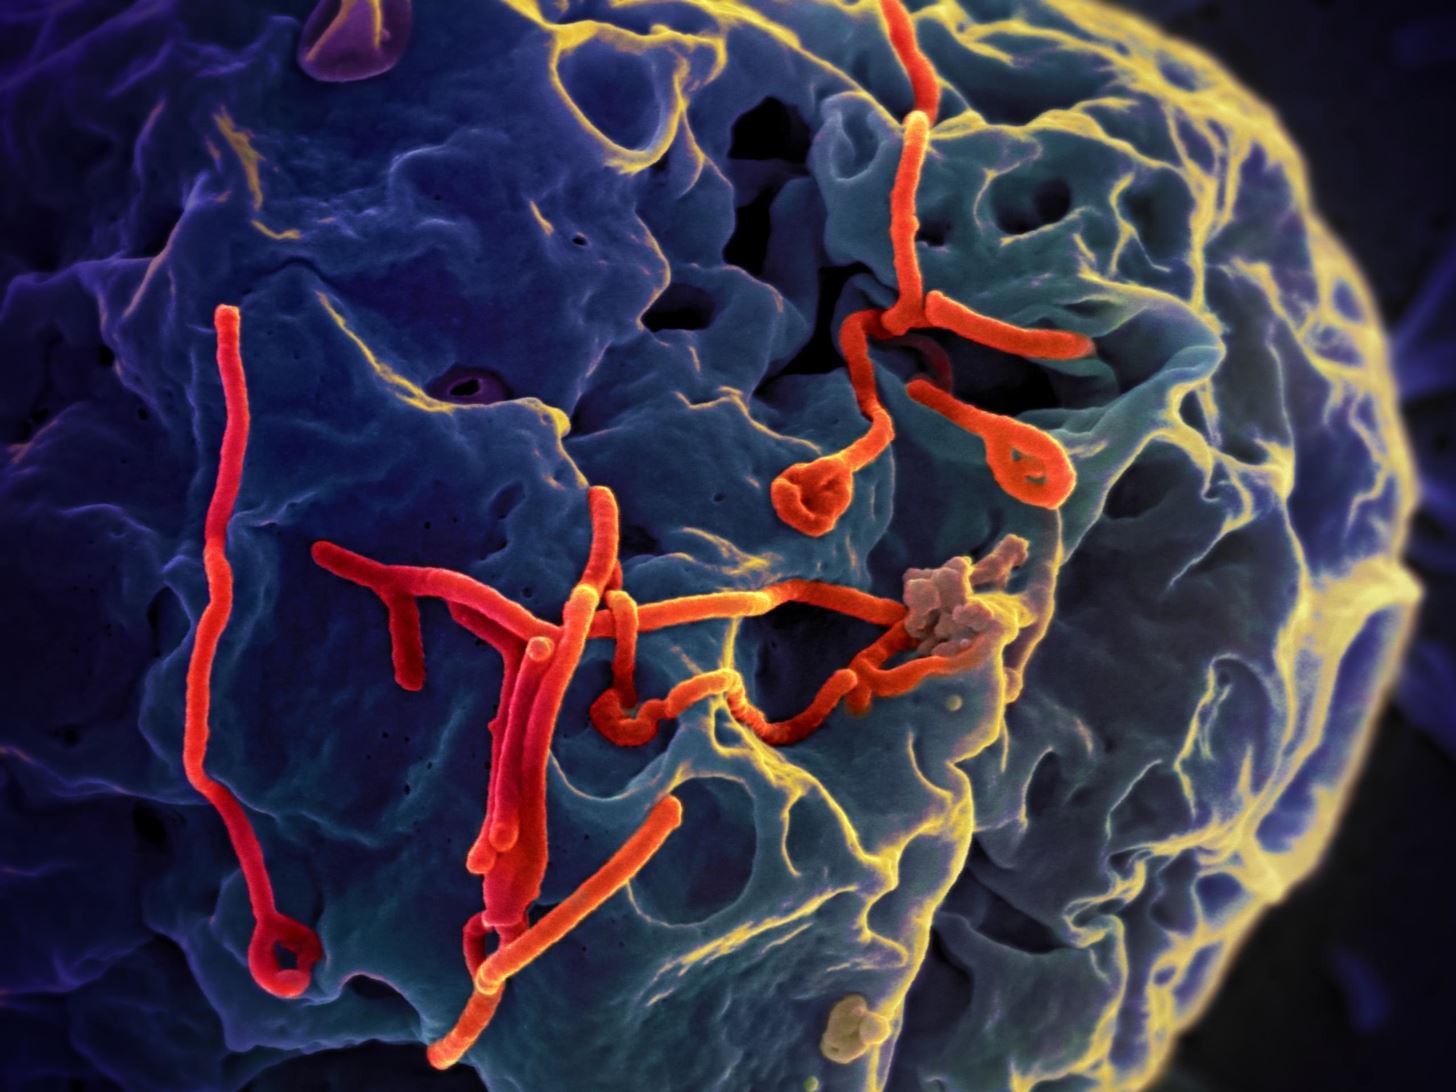 Ebola Survivor May Hold Key to Curing All Types of Ebola Infections